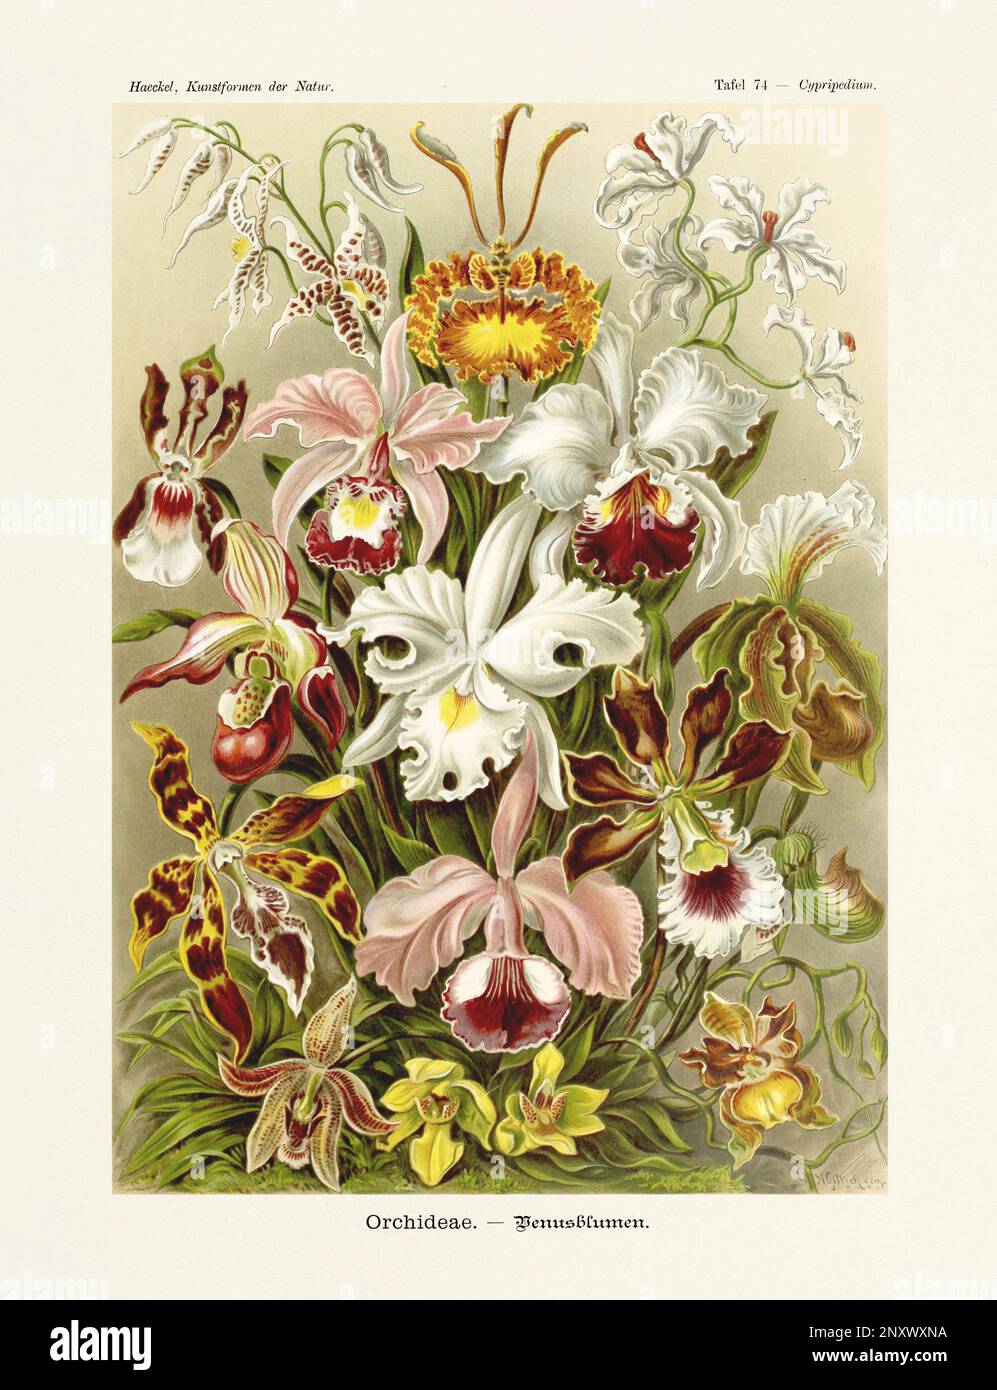 ERNST HAECKEL ART - Orchids -  19th Century - Antique Botanicall illustration - Illustrations of the book : “Art Forms in Nature” Stock Photo